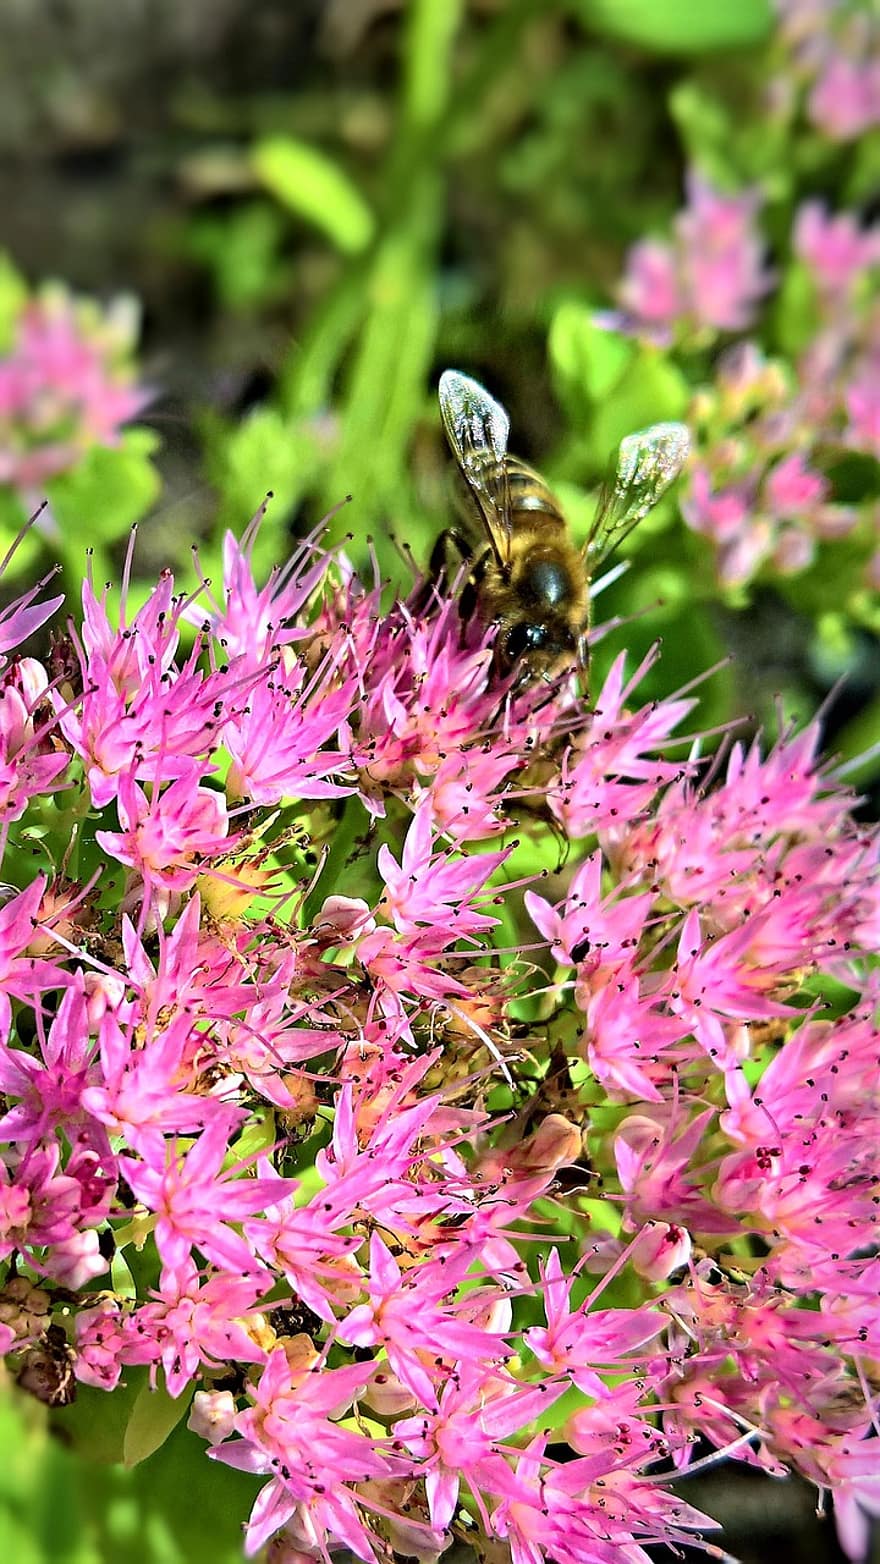 Flowers, Bee, Insect, Pollinate, Pollination, Pink Flowers, Wildflowers, Bloom, Blossom, Flora, Floriculture